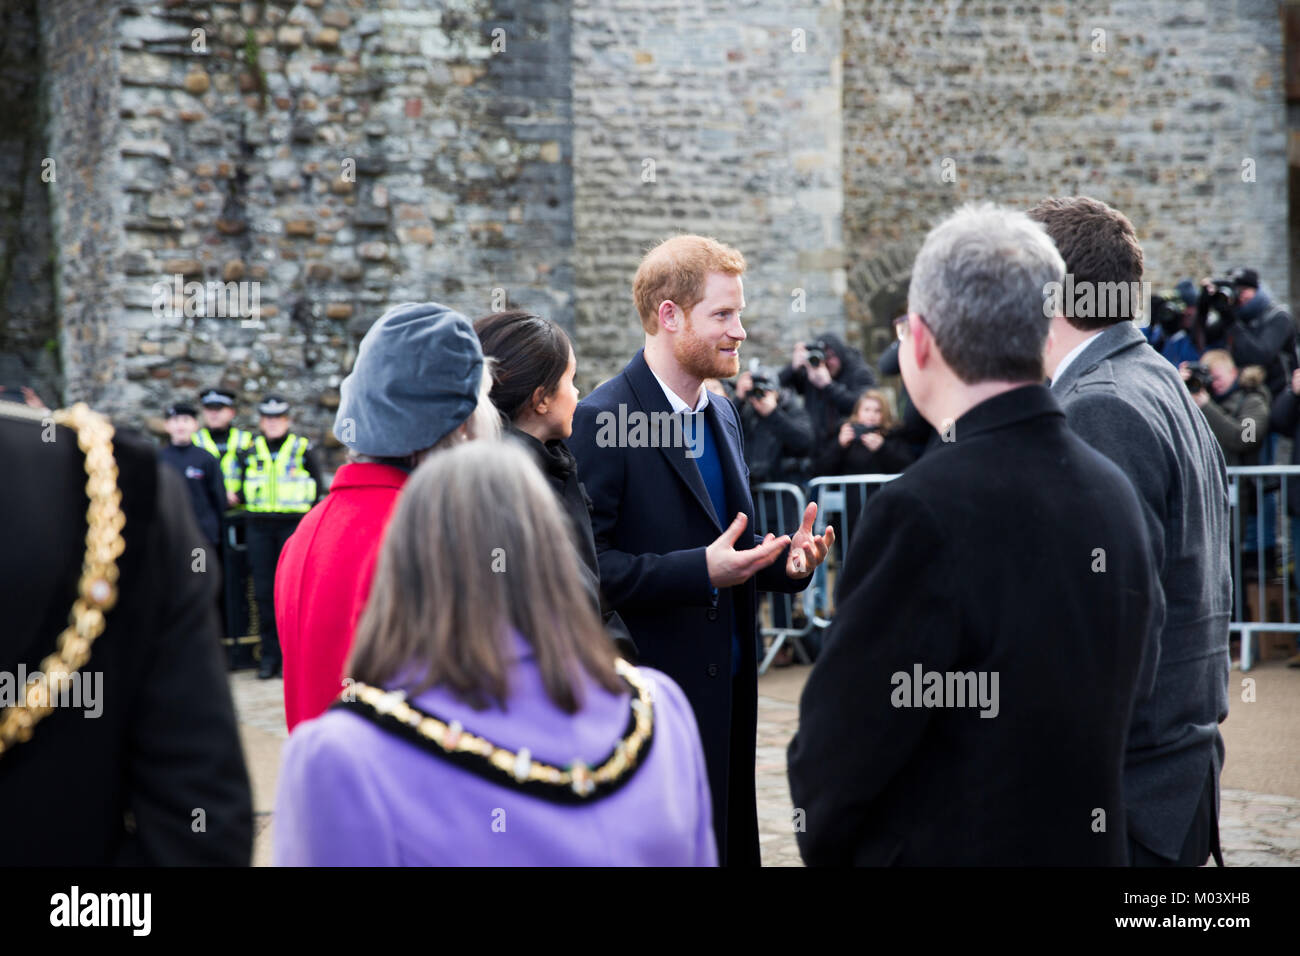 Cardiff Castle, Castle Street, Cardiff, UK. 18th Jan, 2018. Crowds outside Cardiff Castle to see HRH Prince Henry of Wales ( Prince Harry) and American Actress Meghan Markle on their first Royal visit to cardiff together prior to their wedding in may. Credit: Jennifer Dobie/Alamy Live News Stock Photo